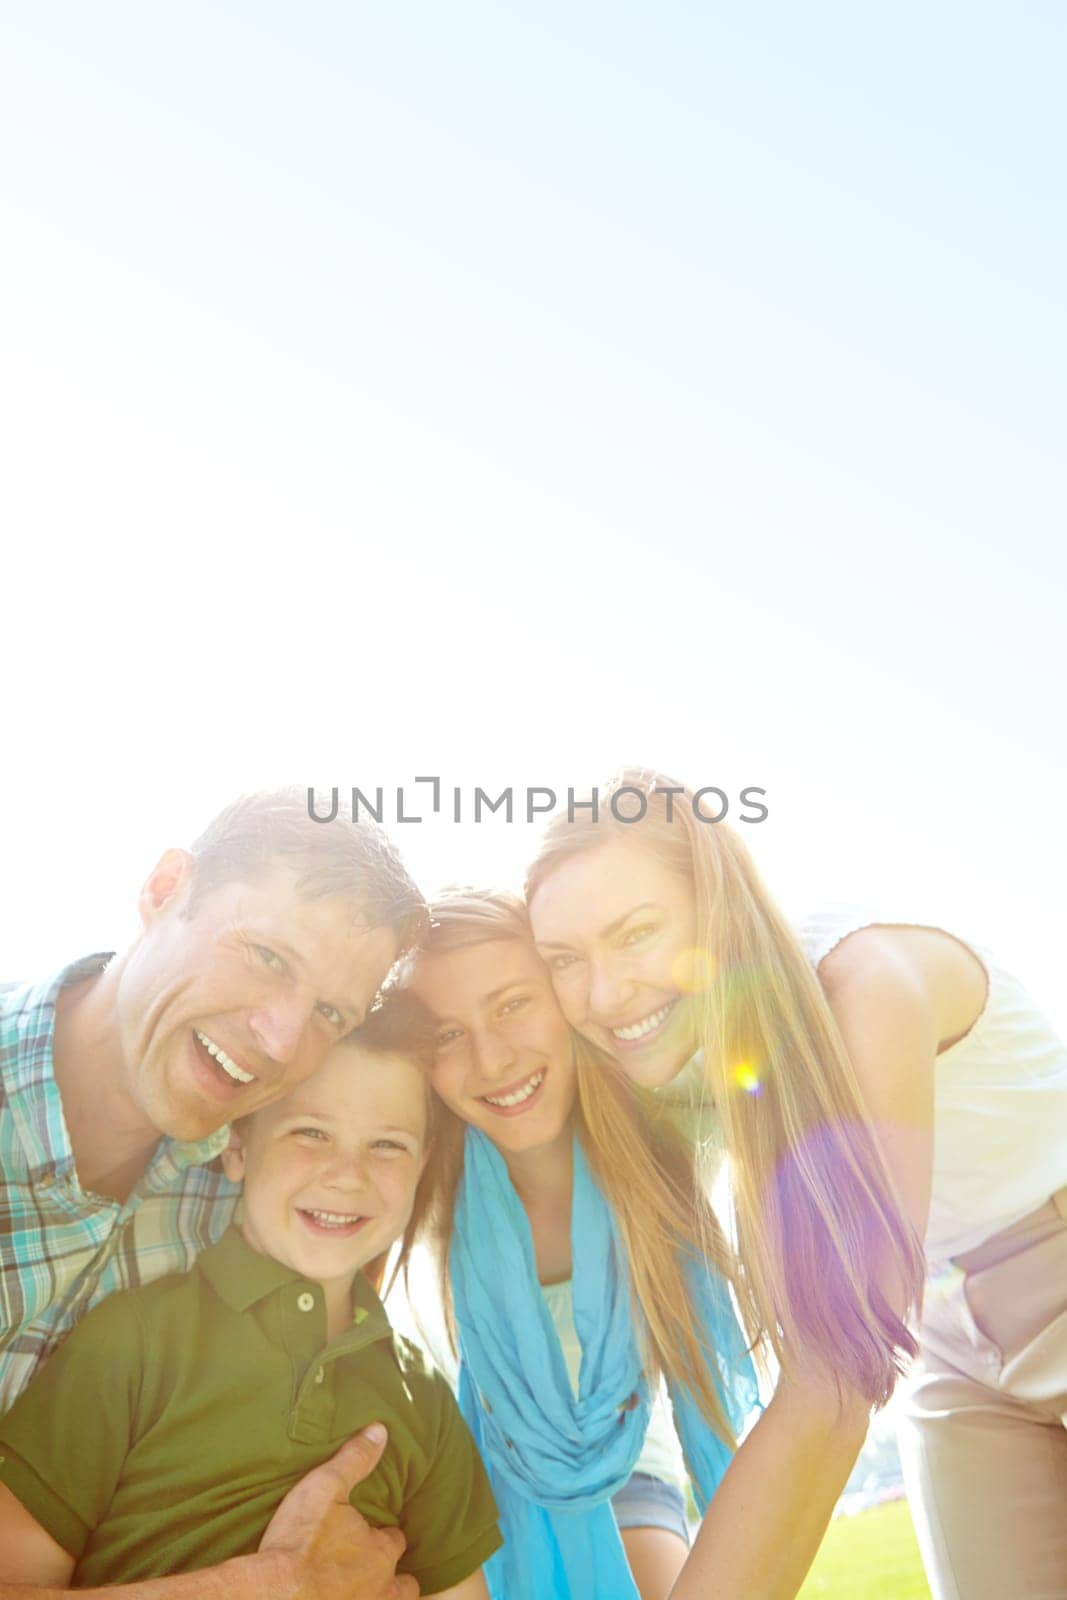 Family fun in the sunshine. A cute young family spending time together outdoors on a summers day